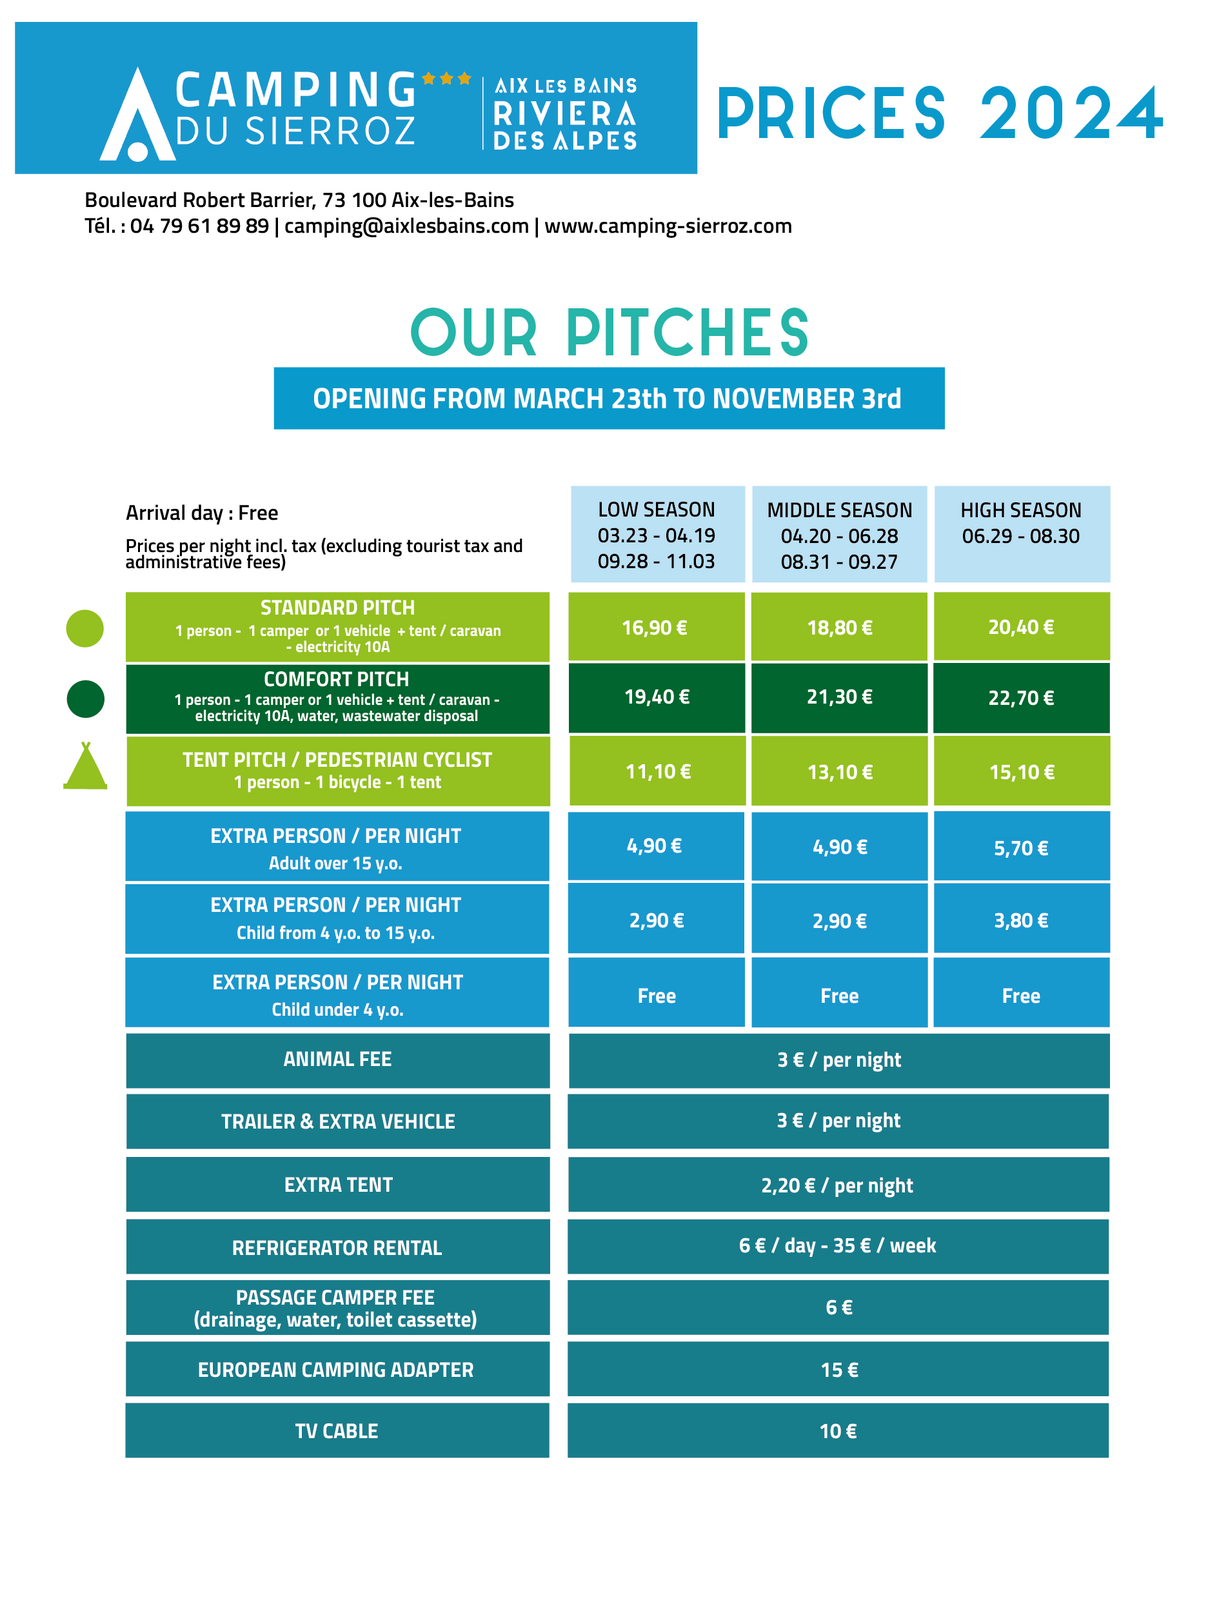 Prices 2024 pitch